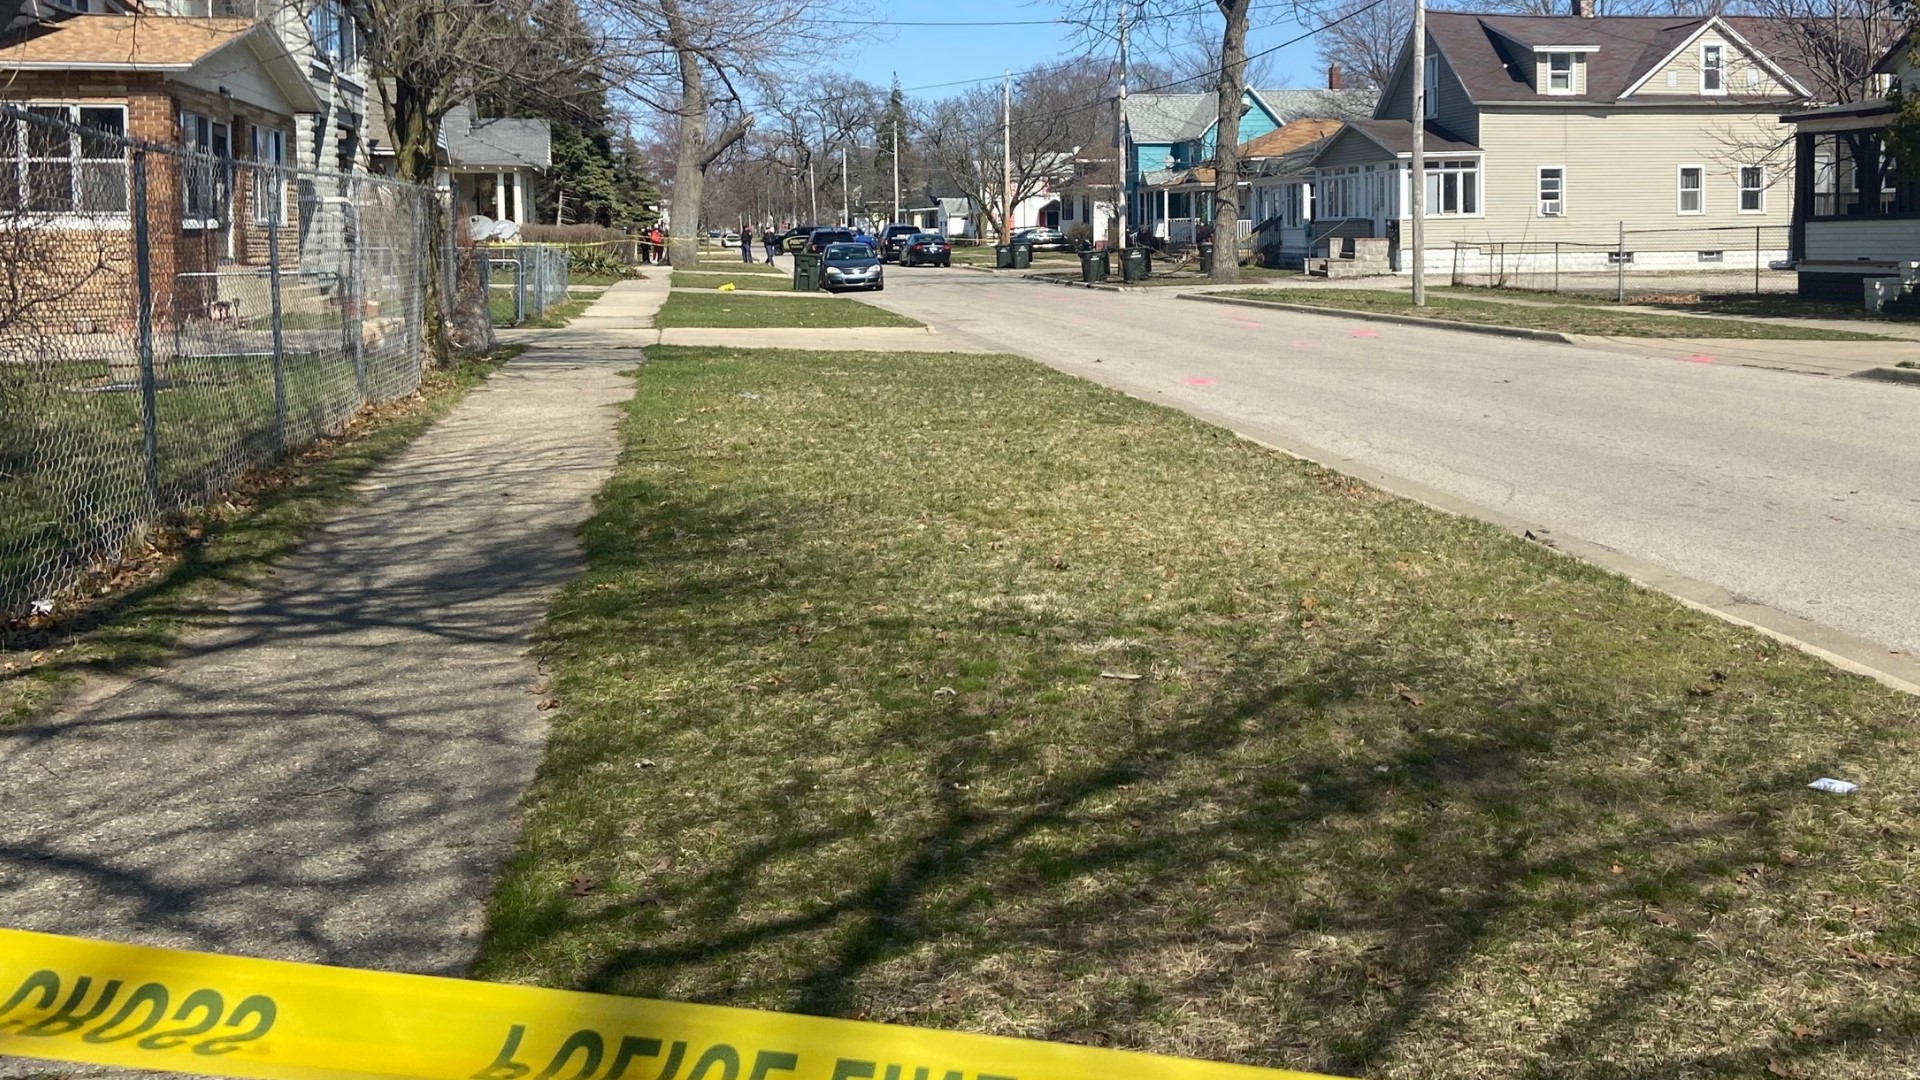 A six-month-old girl has died after being shot Friday afternoon.